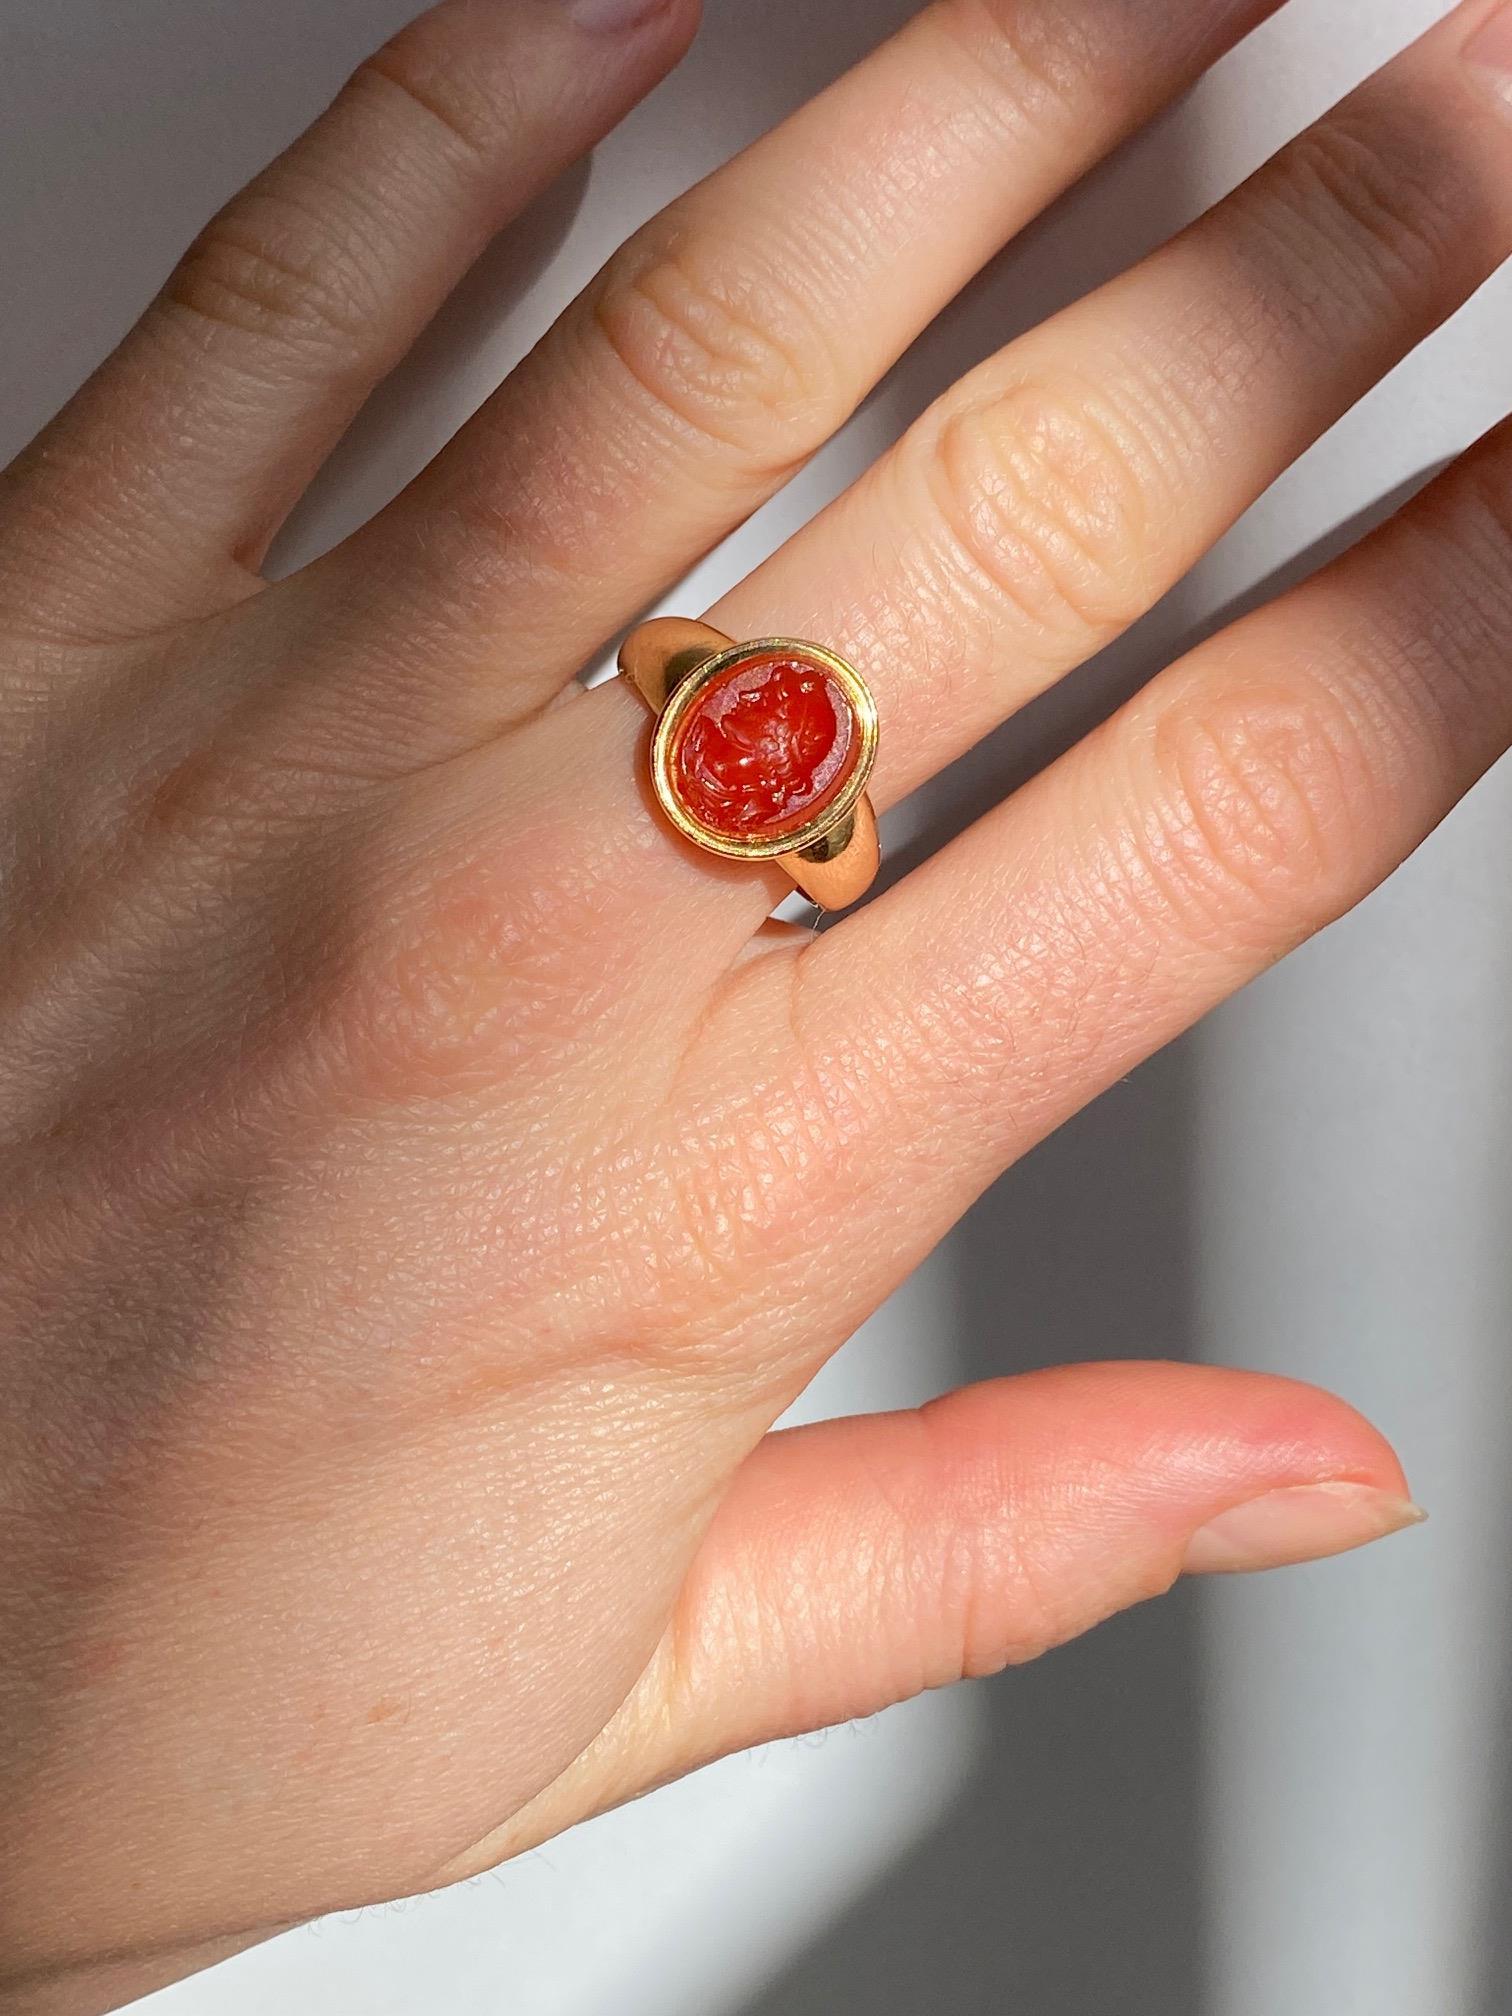 CARNELIAN INTAGLIO GOLD SIGNET RING, EARLY 19TH CENTURY - Image 3 of 6